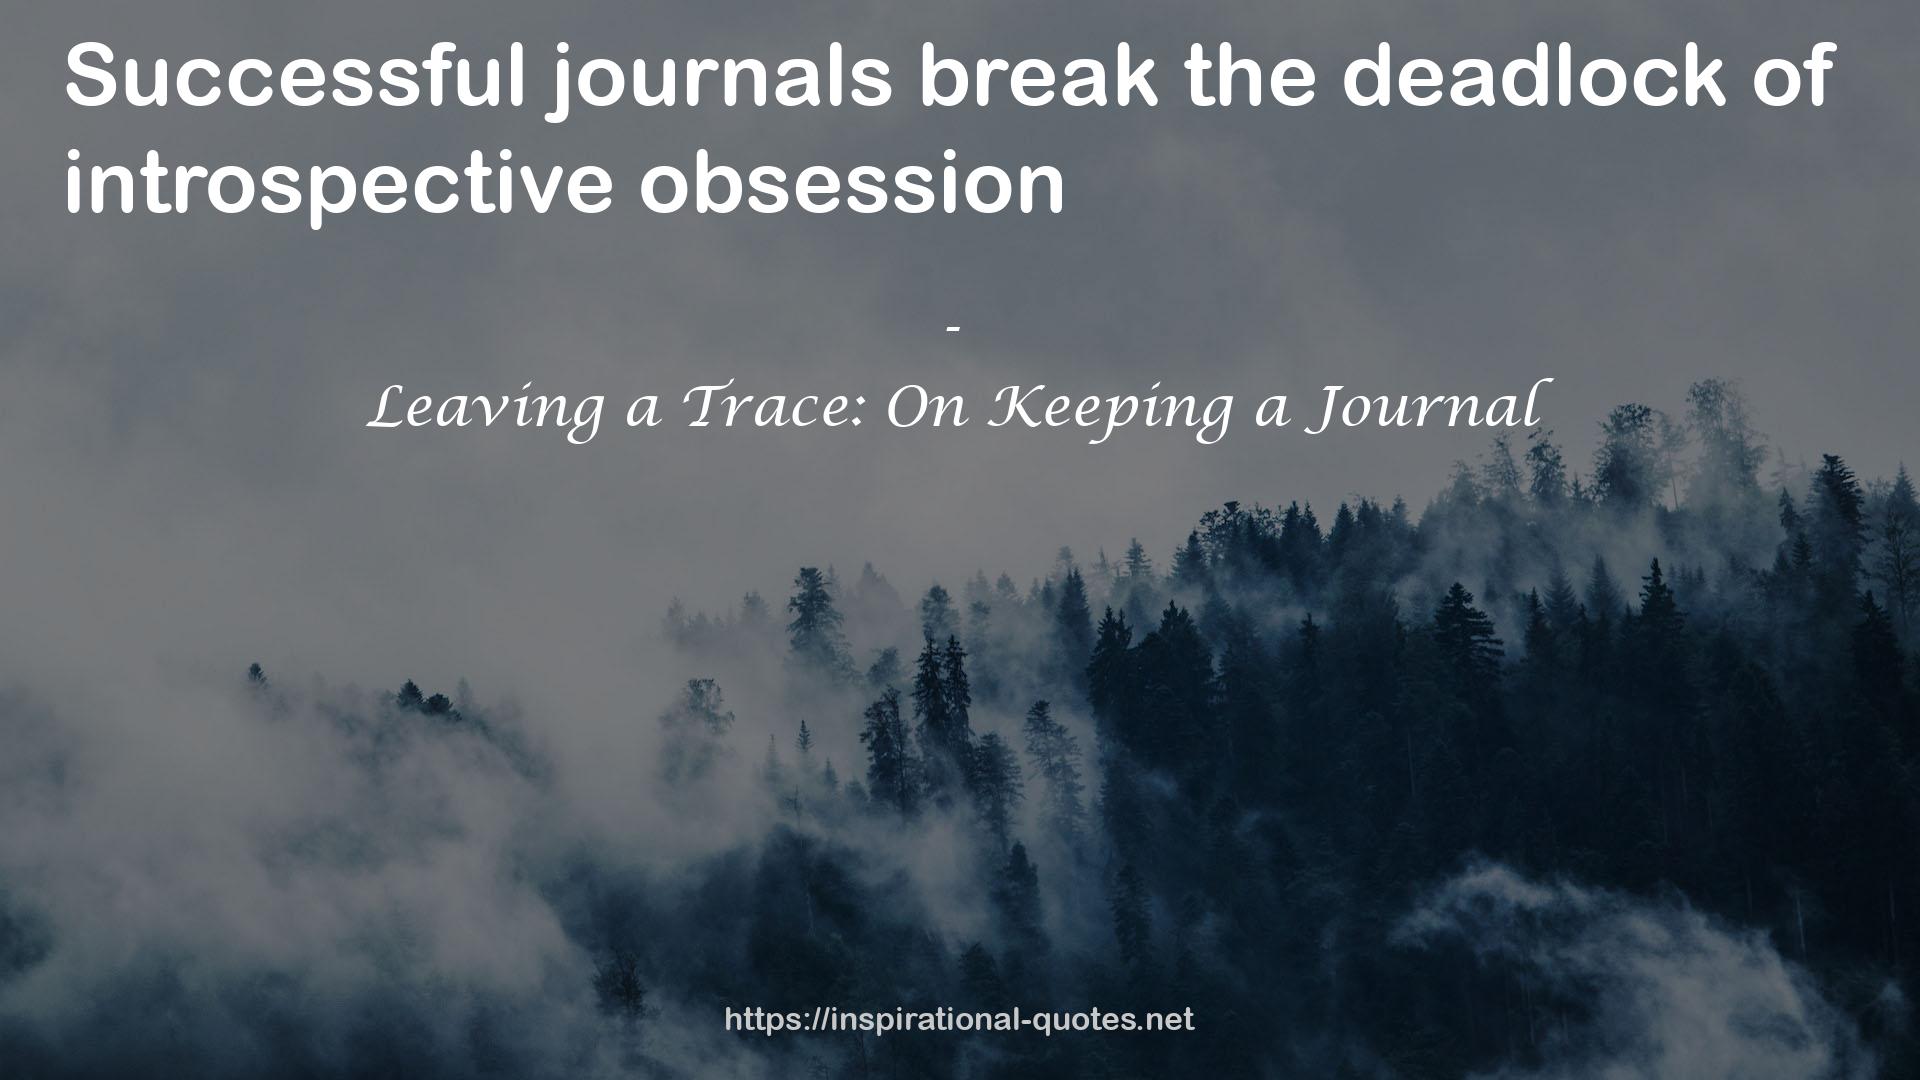 Leaving a Trace: On Keeping a Journal QUOTES